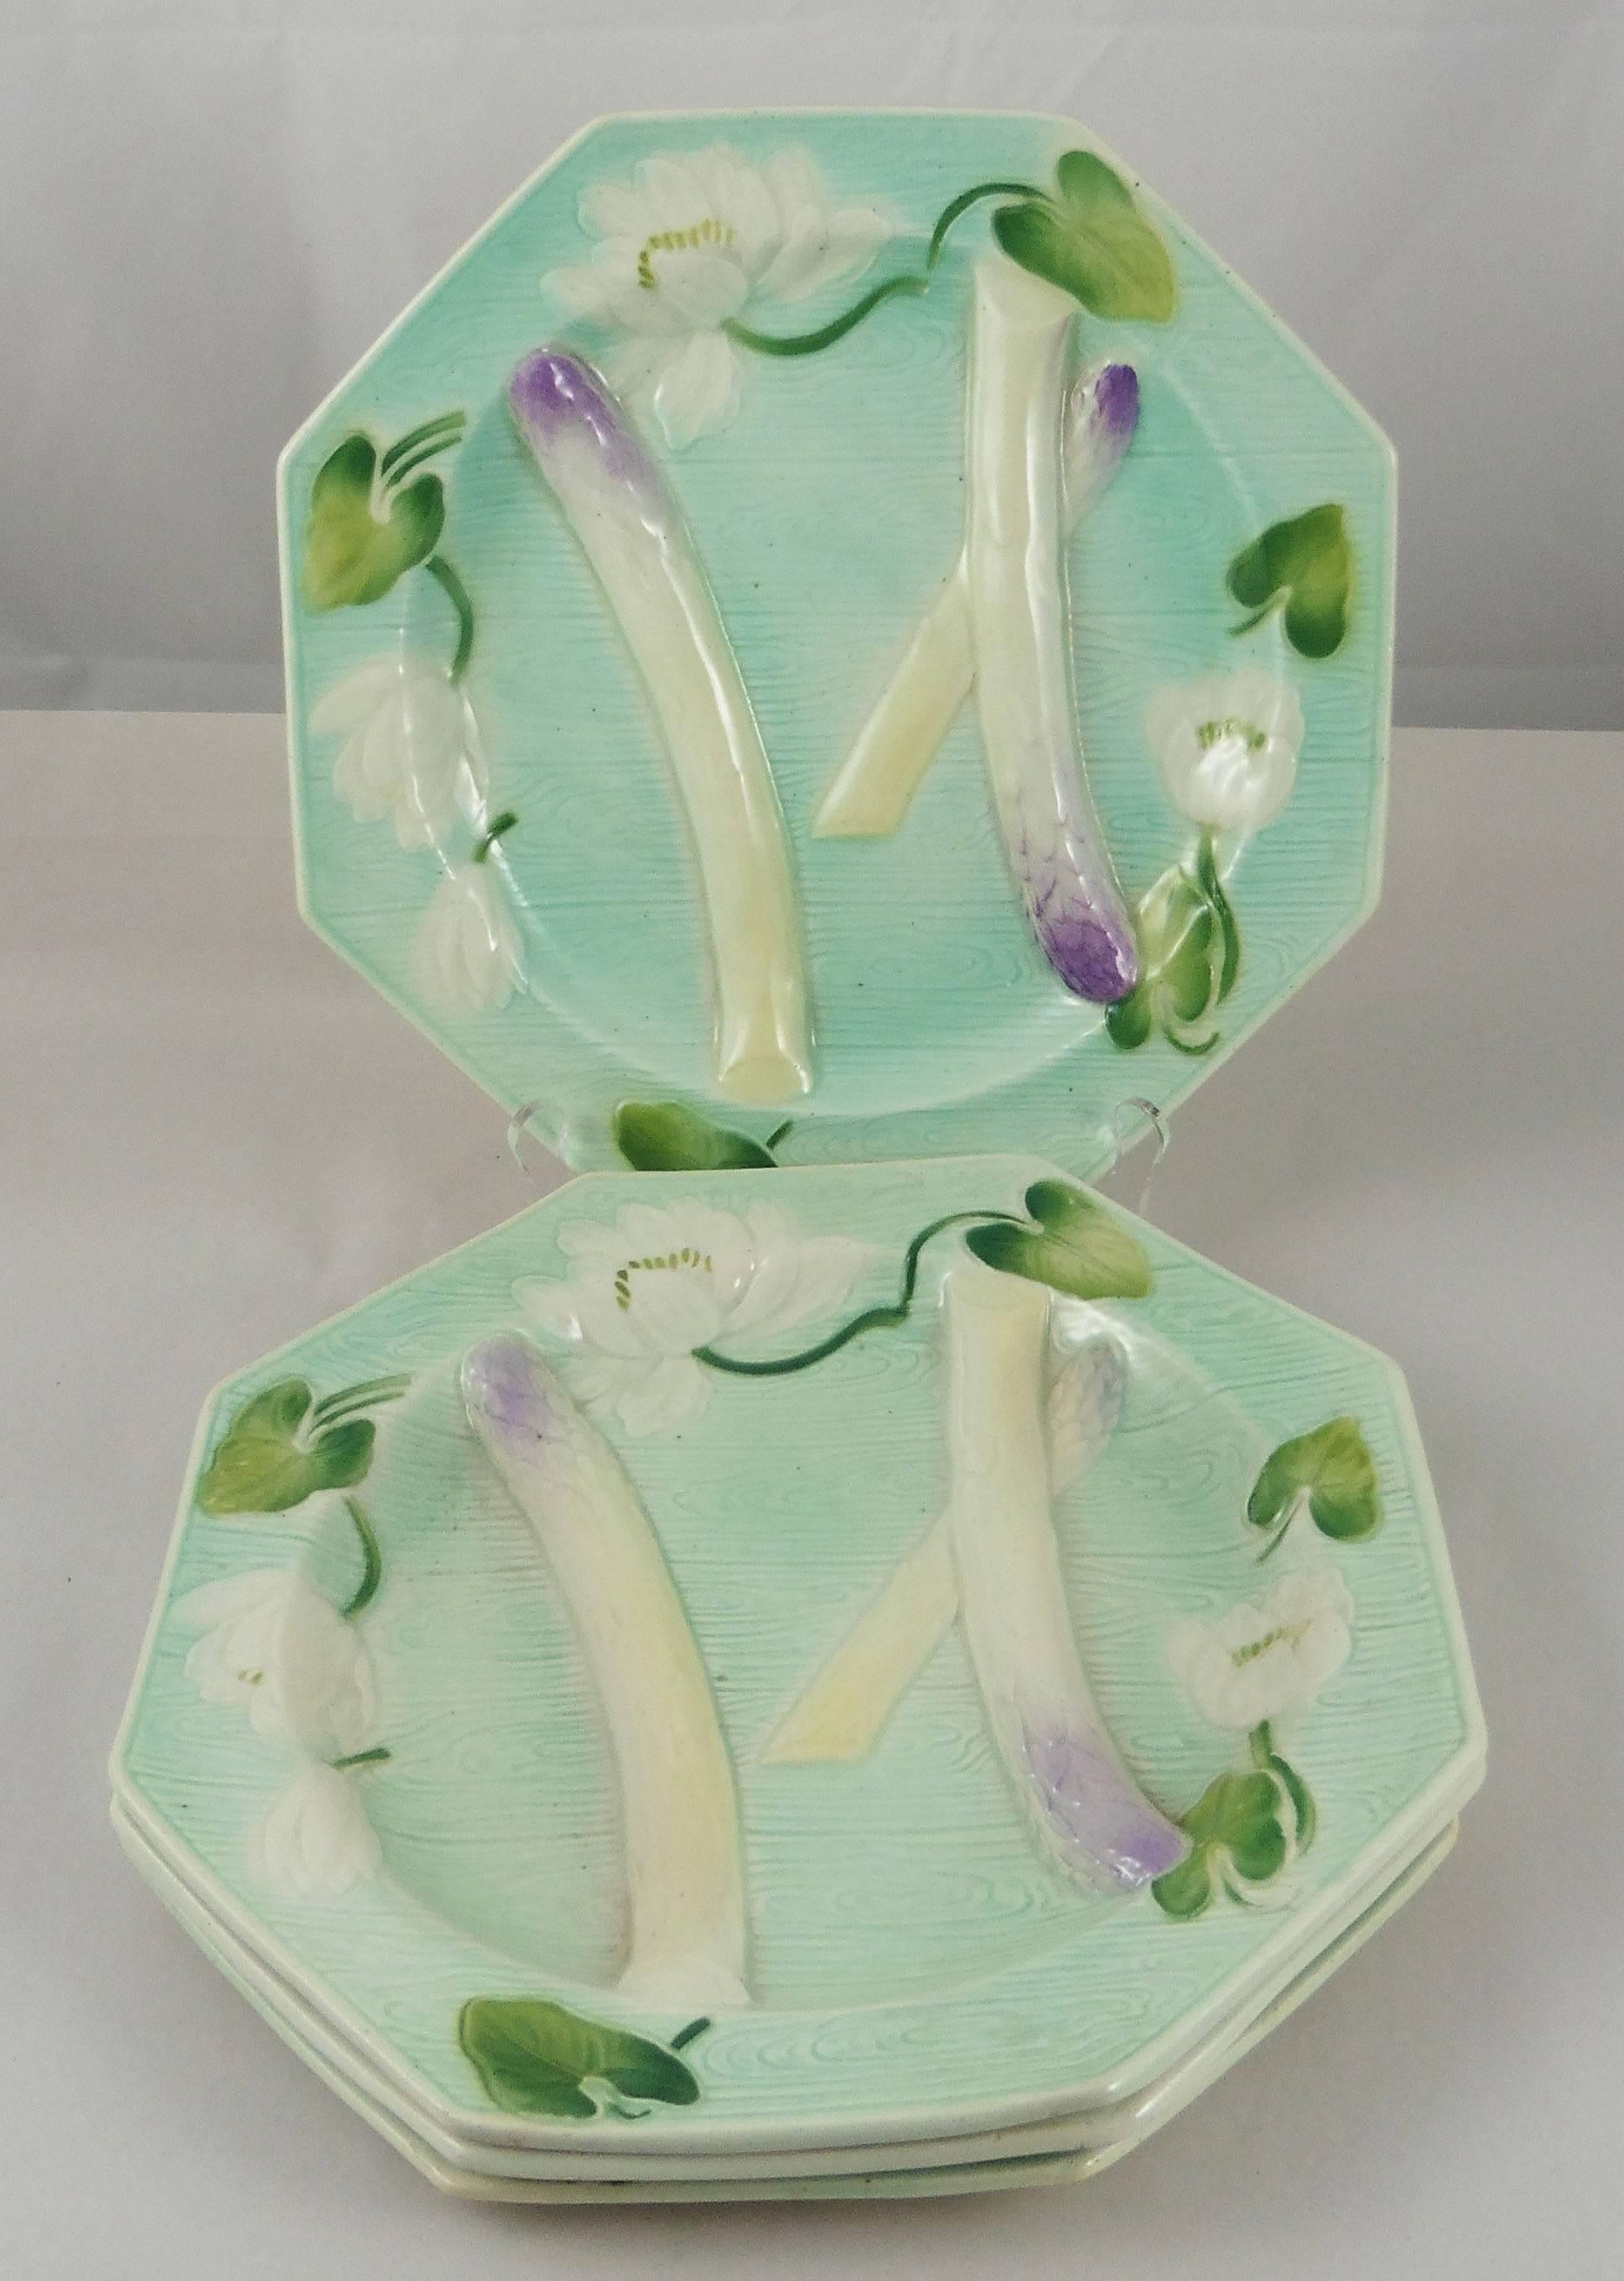 Majolica Art Nouveau asparagus plate signed Keller et Guerin Saint Clement, unusual shape.
Every important French manufactures produced at the end of the 19th century asparagus and artichoke sets.
Reference / Page 15 